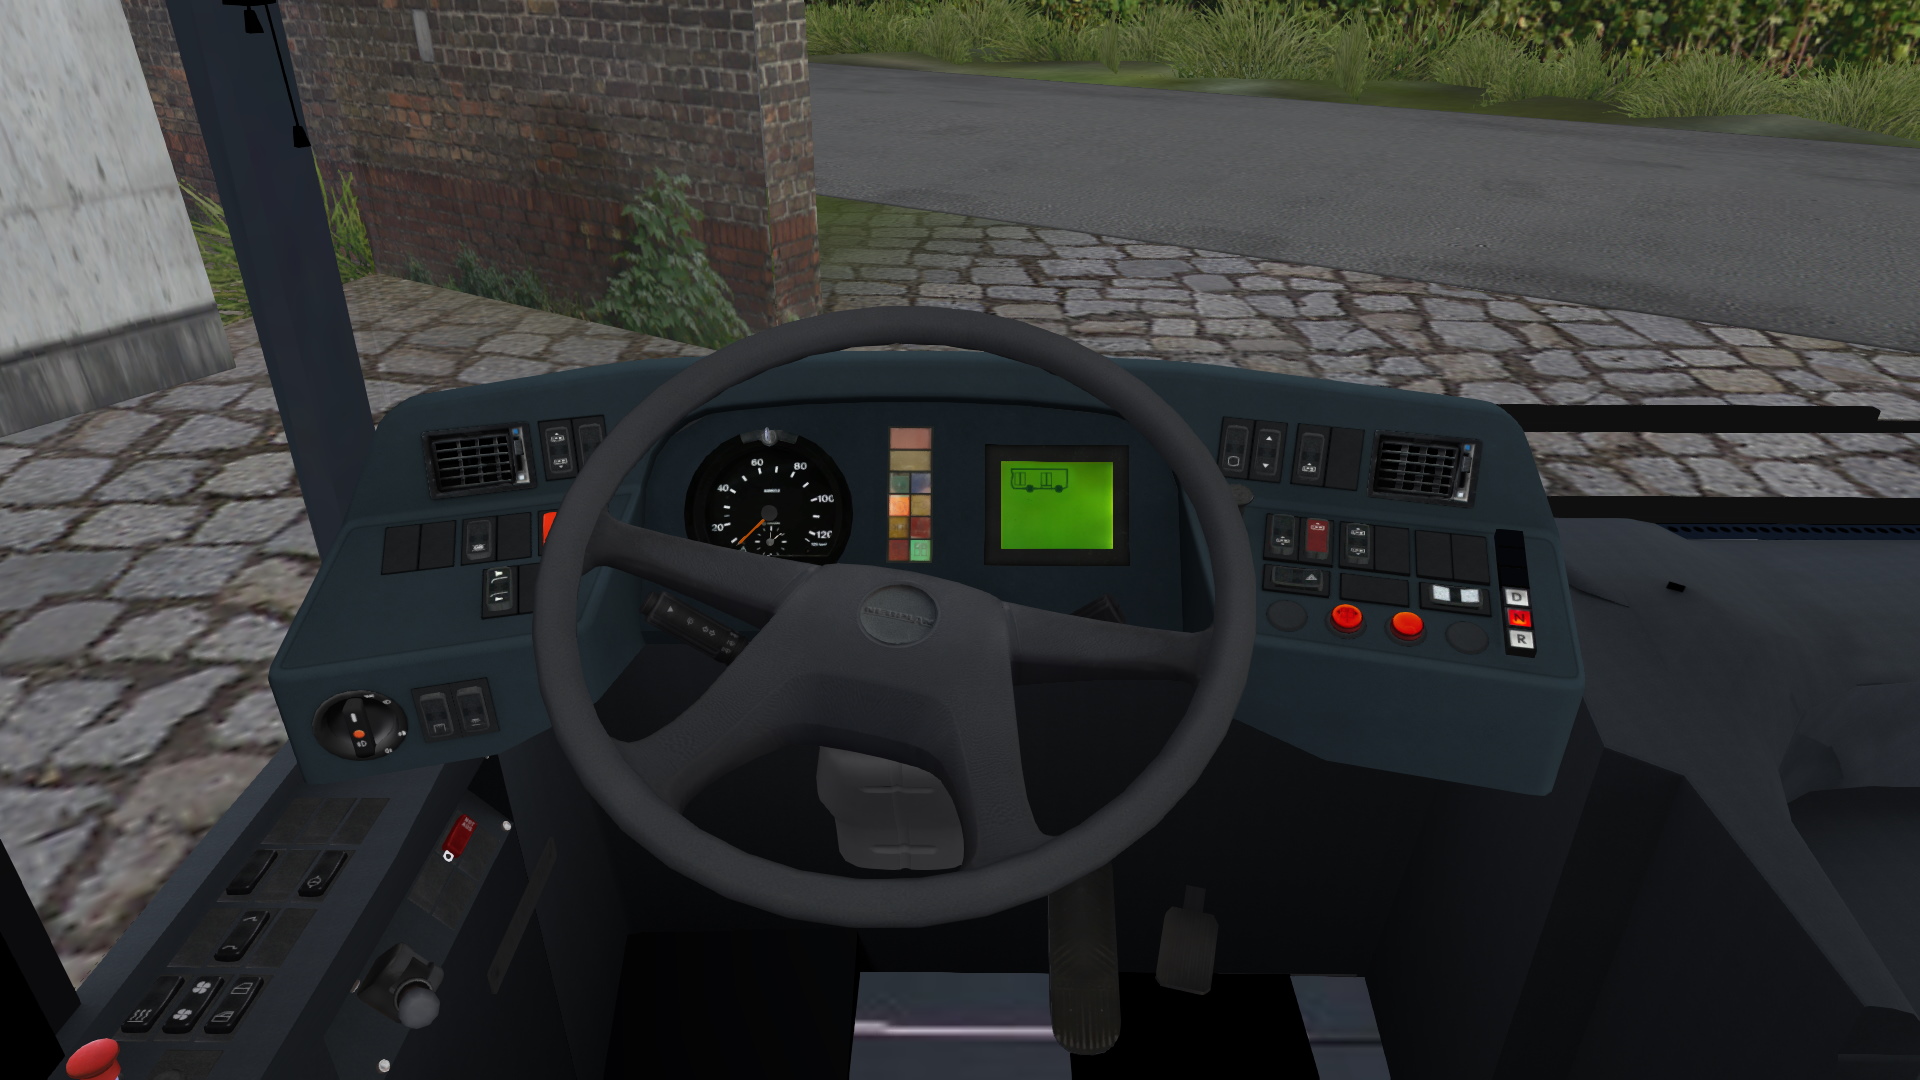 [Omsi2] Neoplan Centroliner Euro 3 BETA V 0.7 - PATCH/UPDATE! (by Kevin2704) 10555-2-jpg